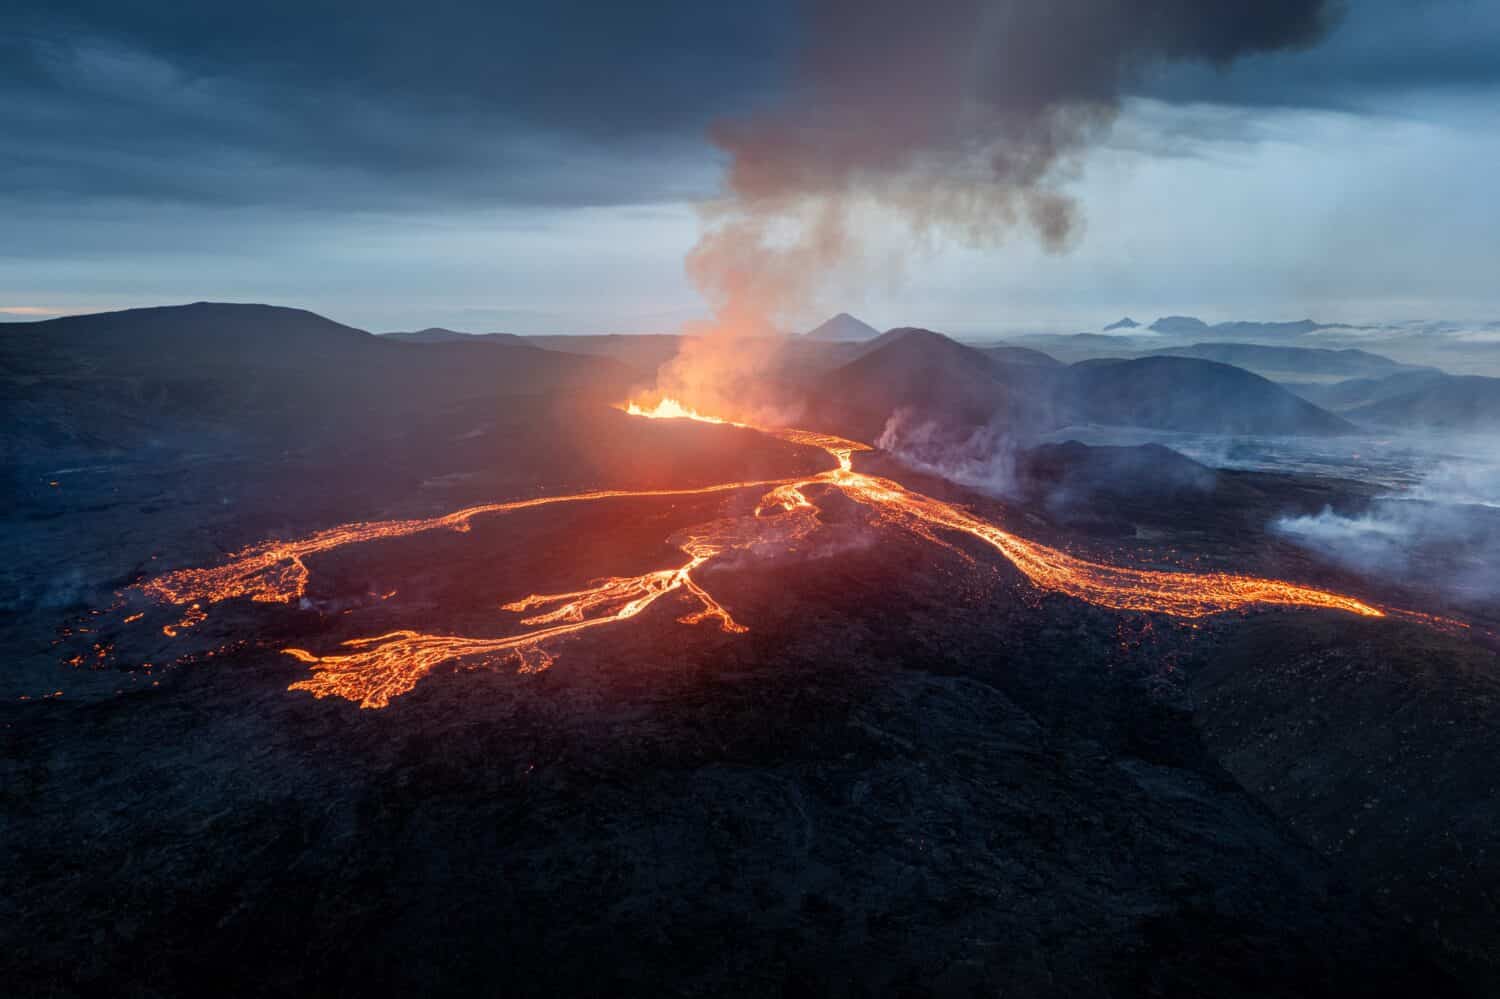 A scenic view of lava in the Fagradalsfjall volcano in Iceland on cloudy sky background